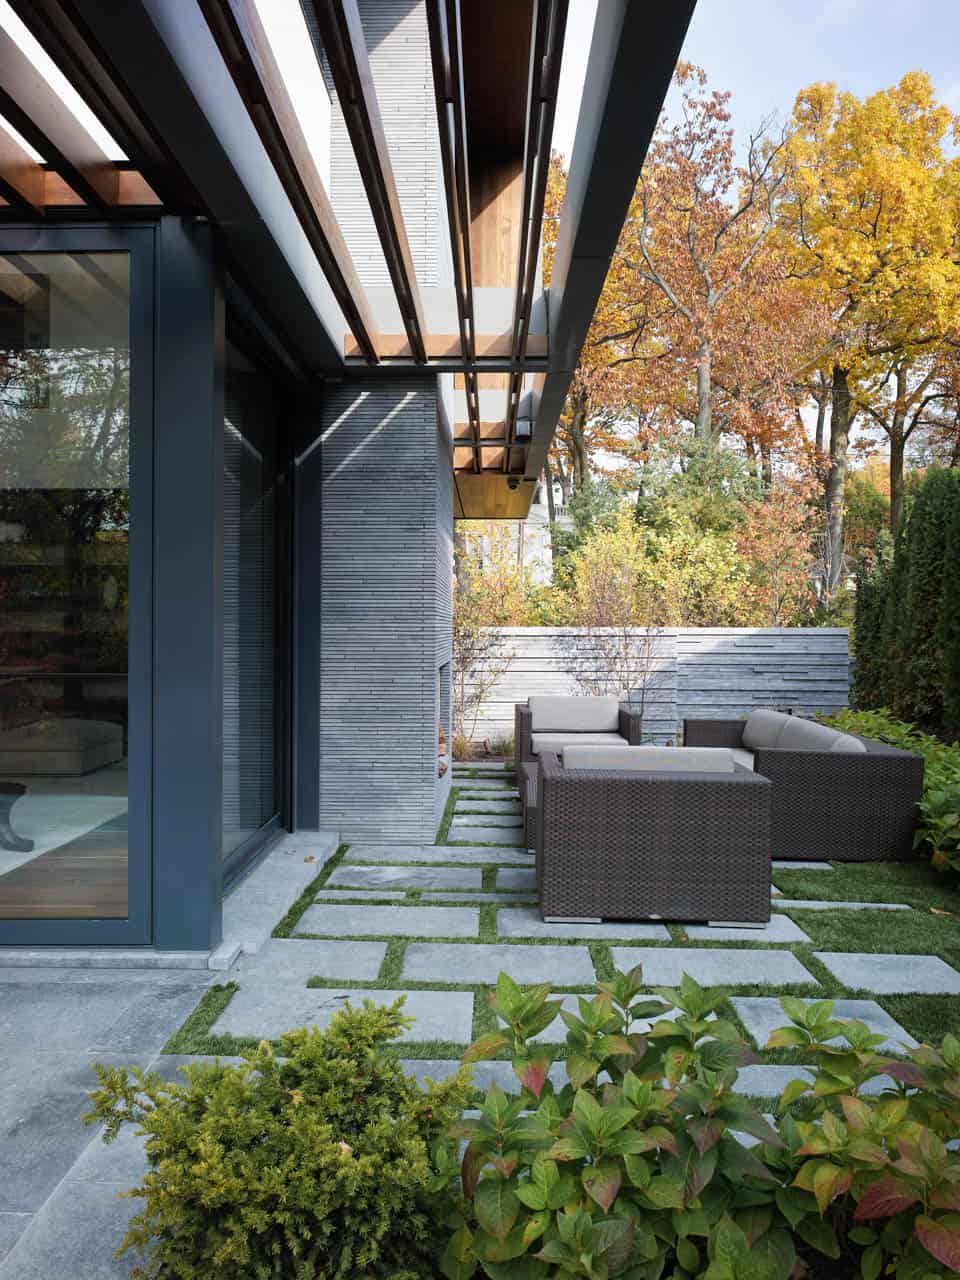 stunning-details-large-open-spaces-define-toronto-home-17-outdoors.jpg